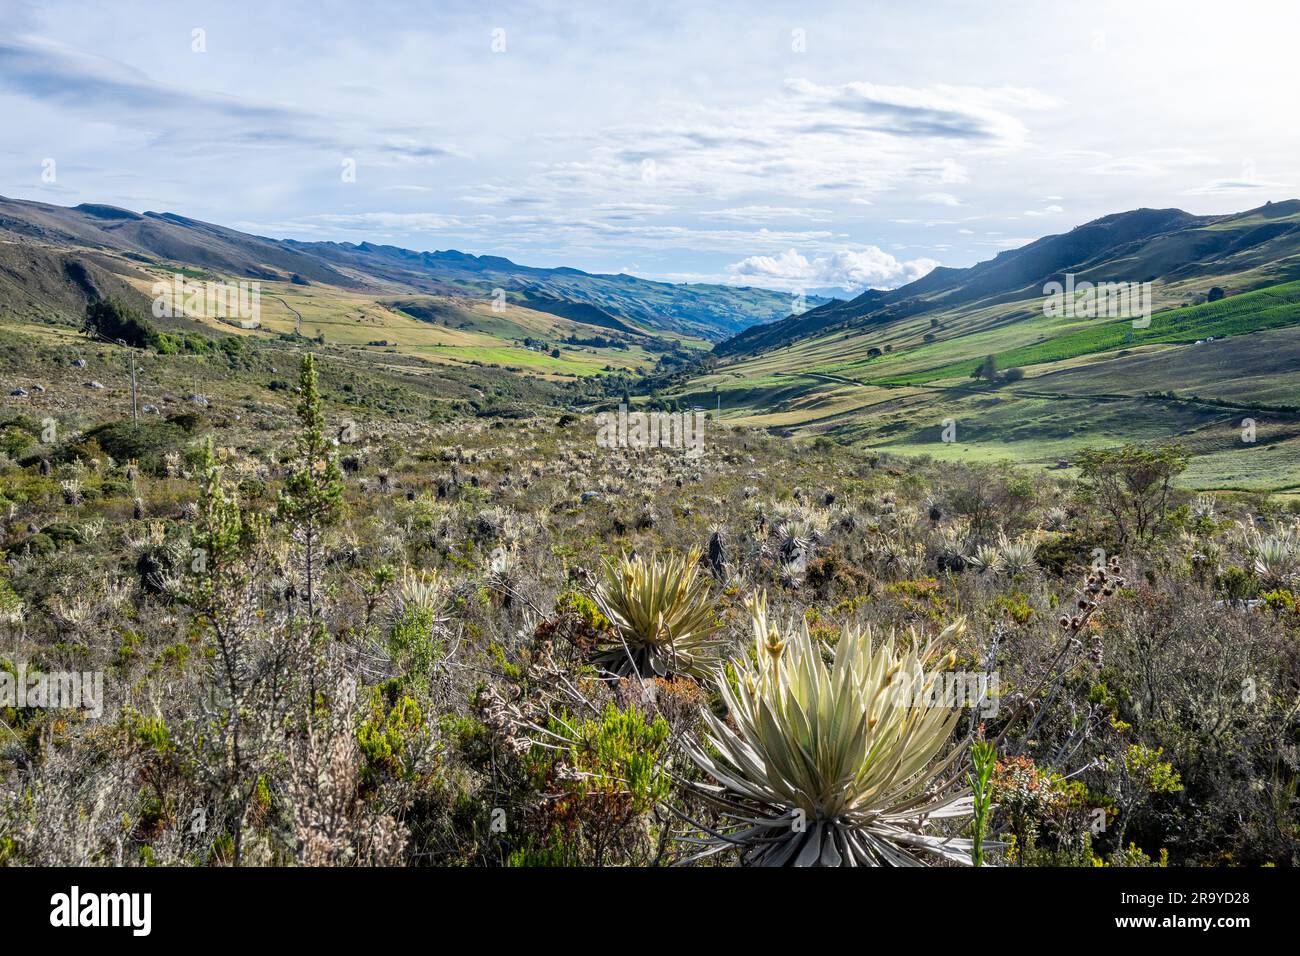 High elevation paramo landscape and eco-system of Andes Mountains. Sumapaz Parque Nacional Natural. Colombia, South America. Stock Photo